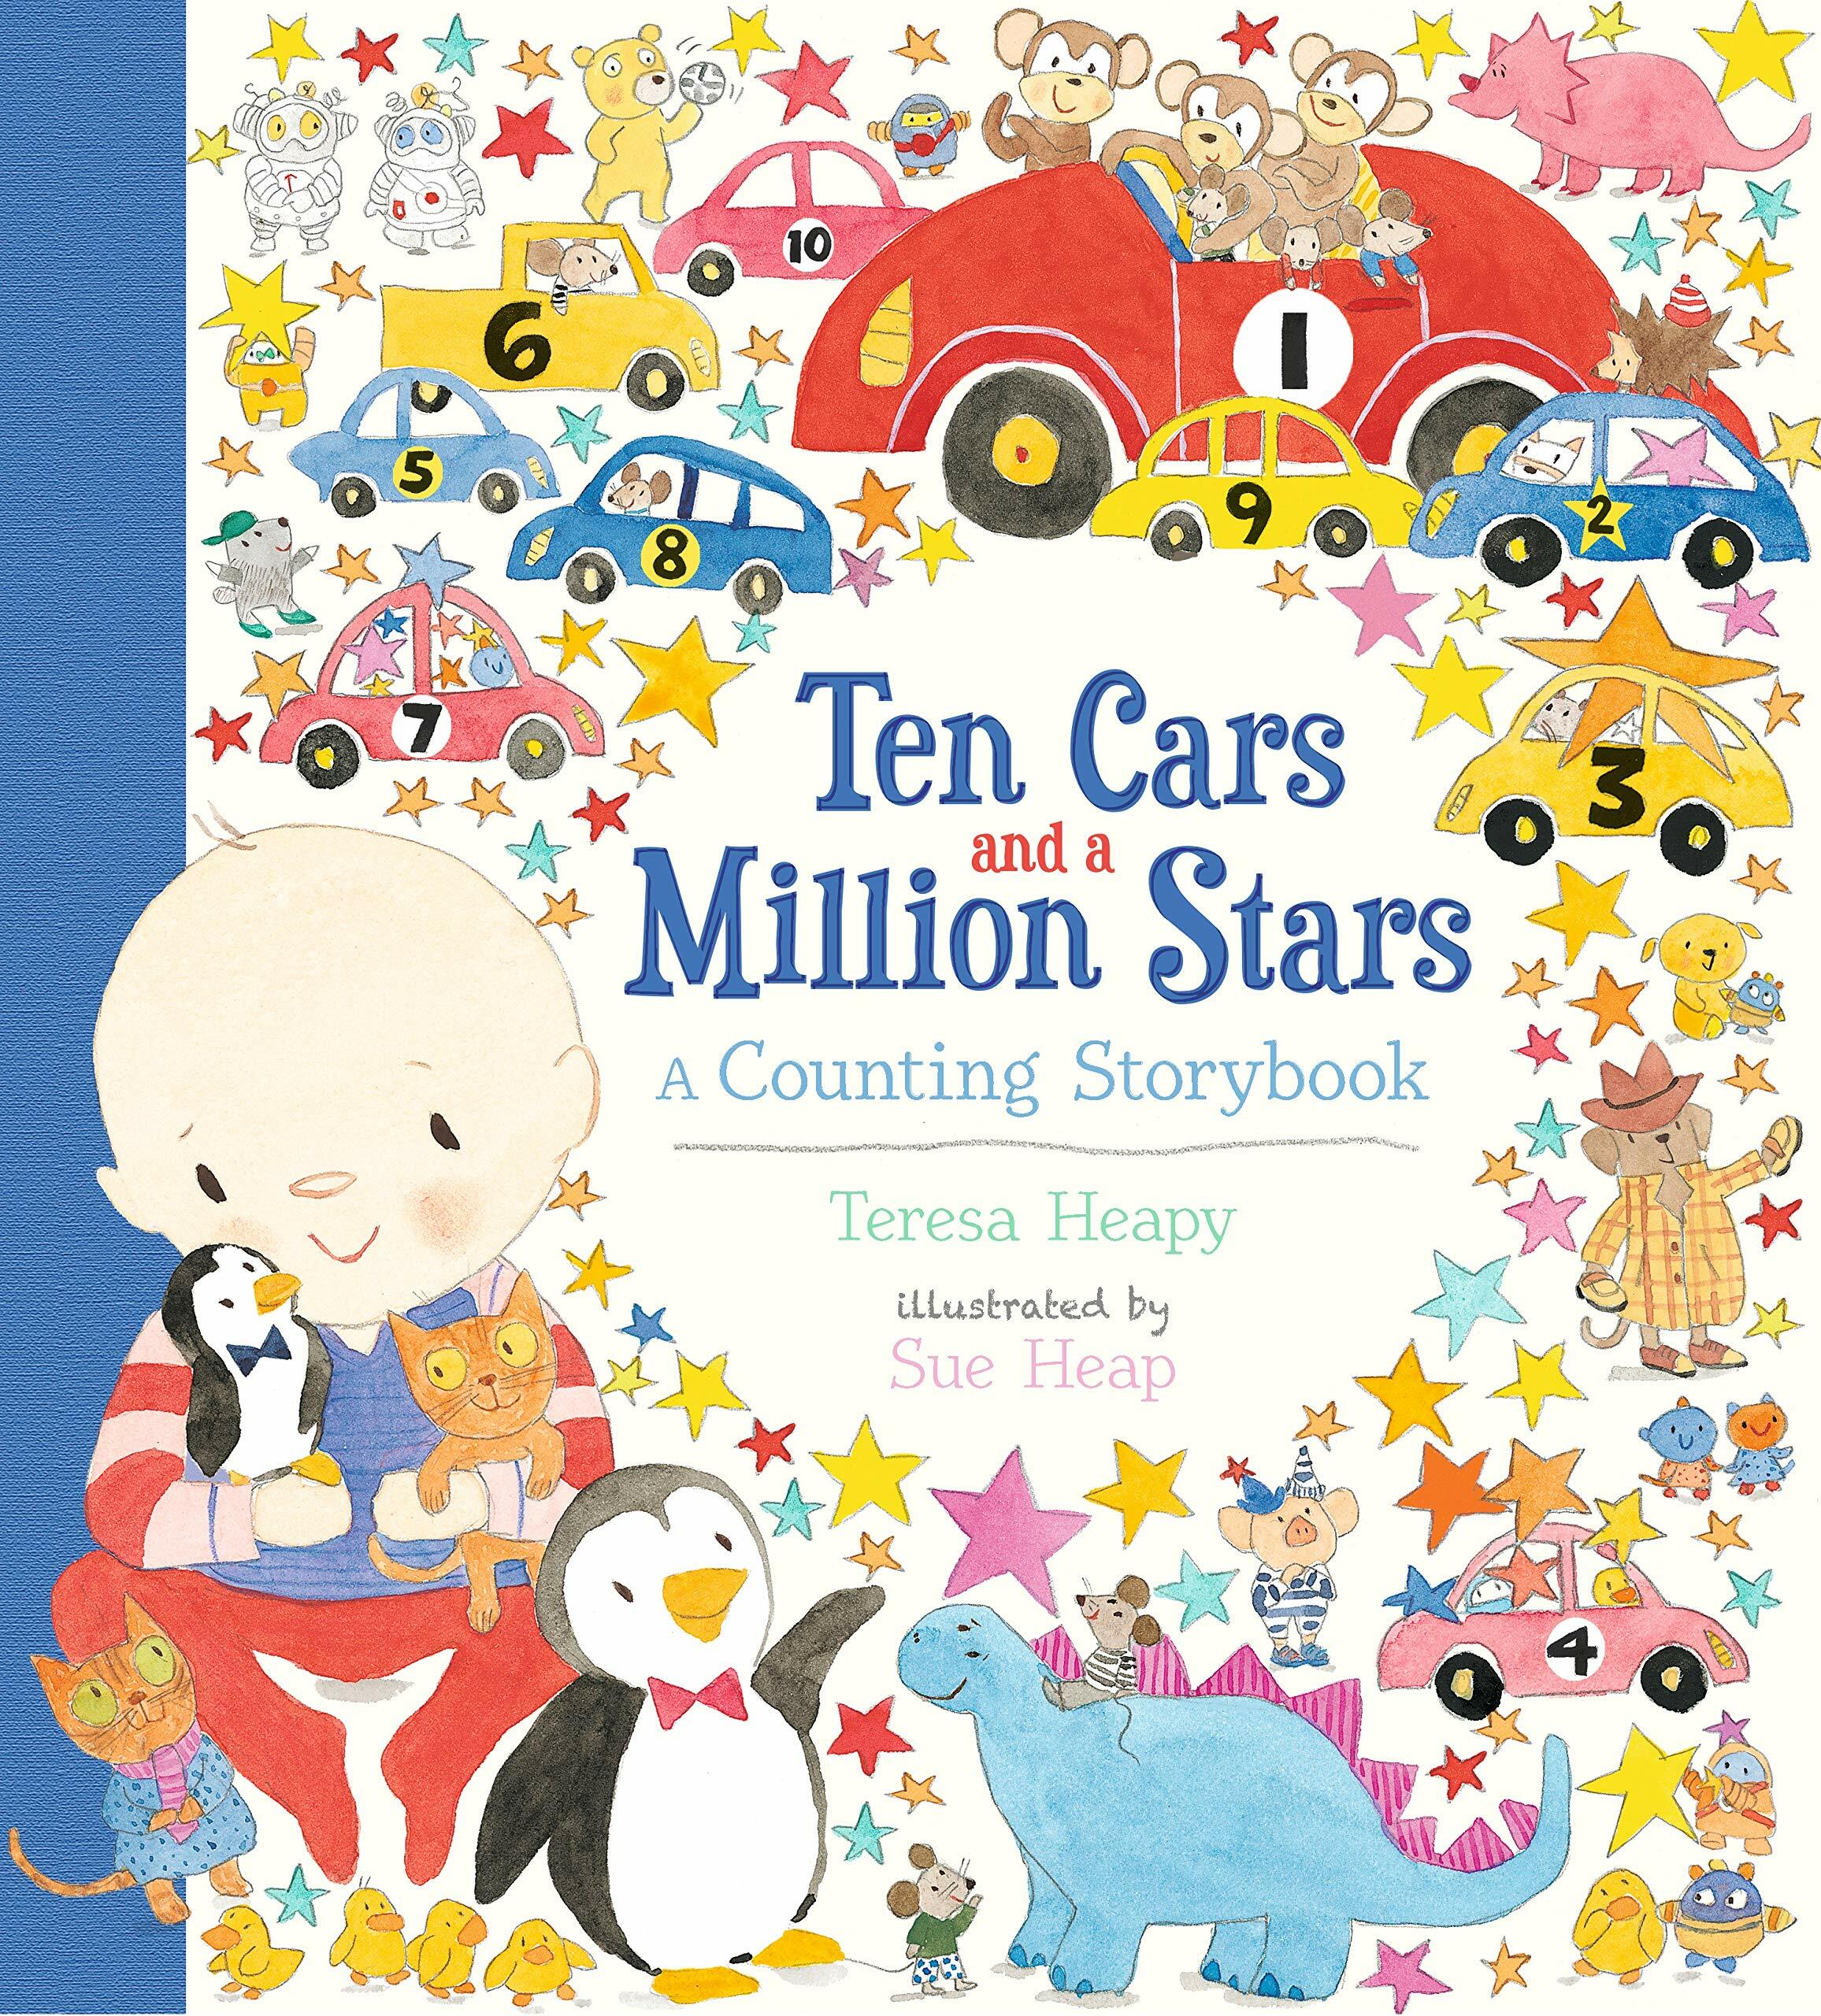 Ten Cars and a Million Stars : A Counting Storybook (Hardcover)